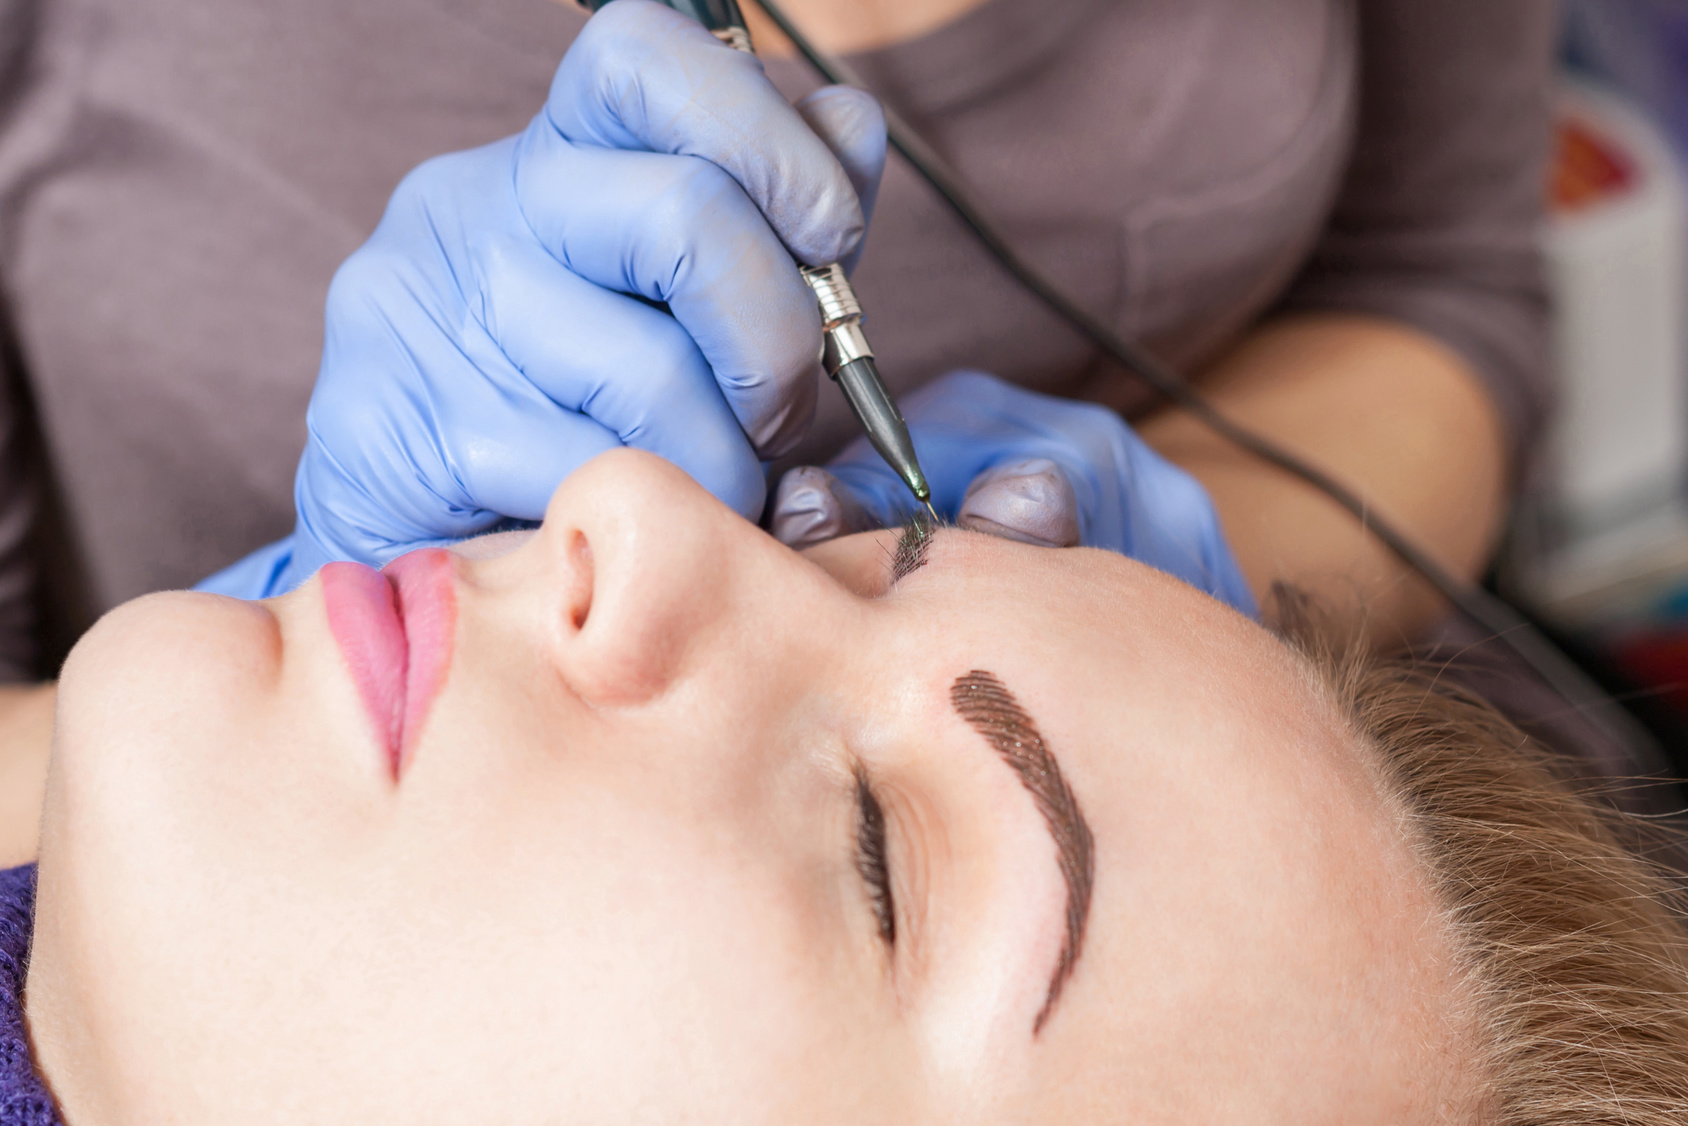 Women: Why Microblading Is Gaining Popularity